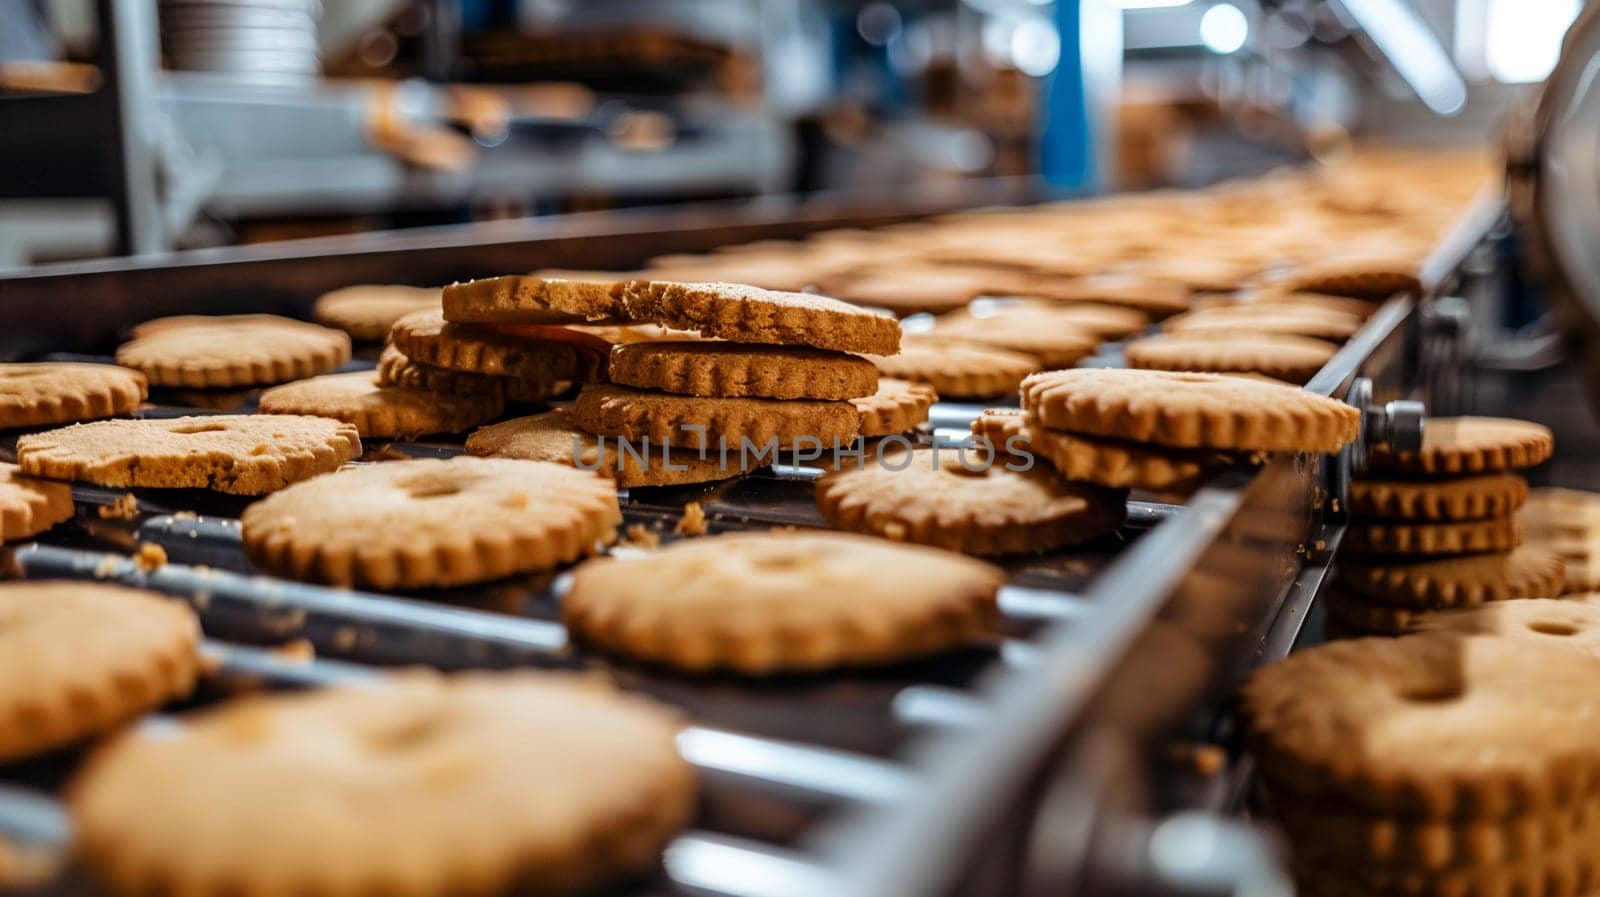 Close-up of freshly baked cookies moving on conveyor belt in an industrial pastry production factory, symbolizing mass production and food industry.